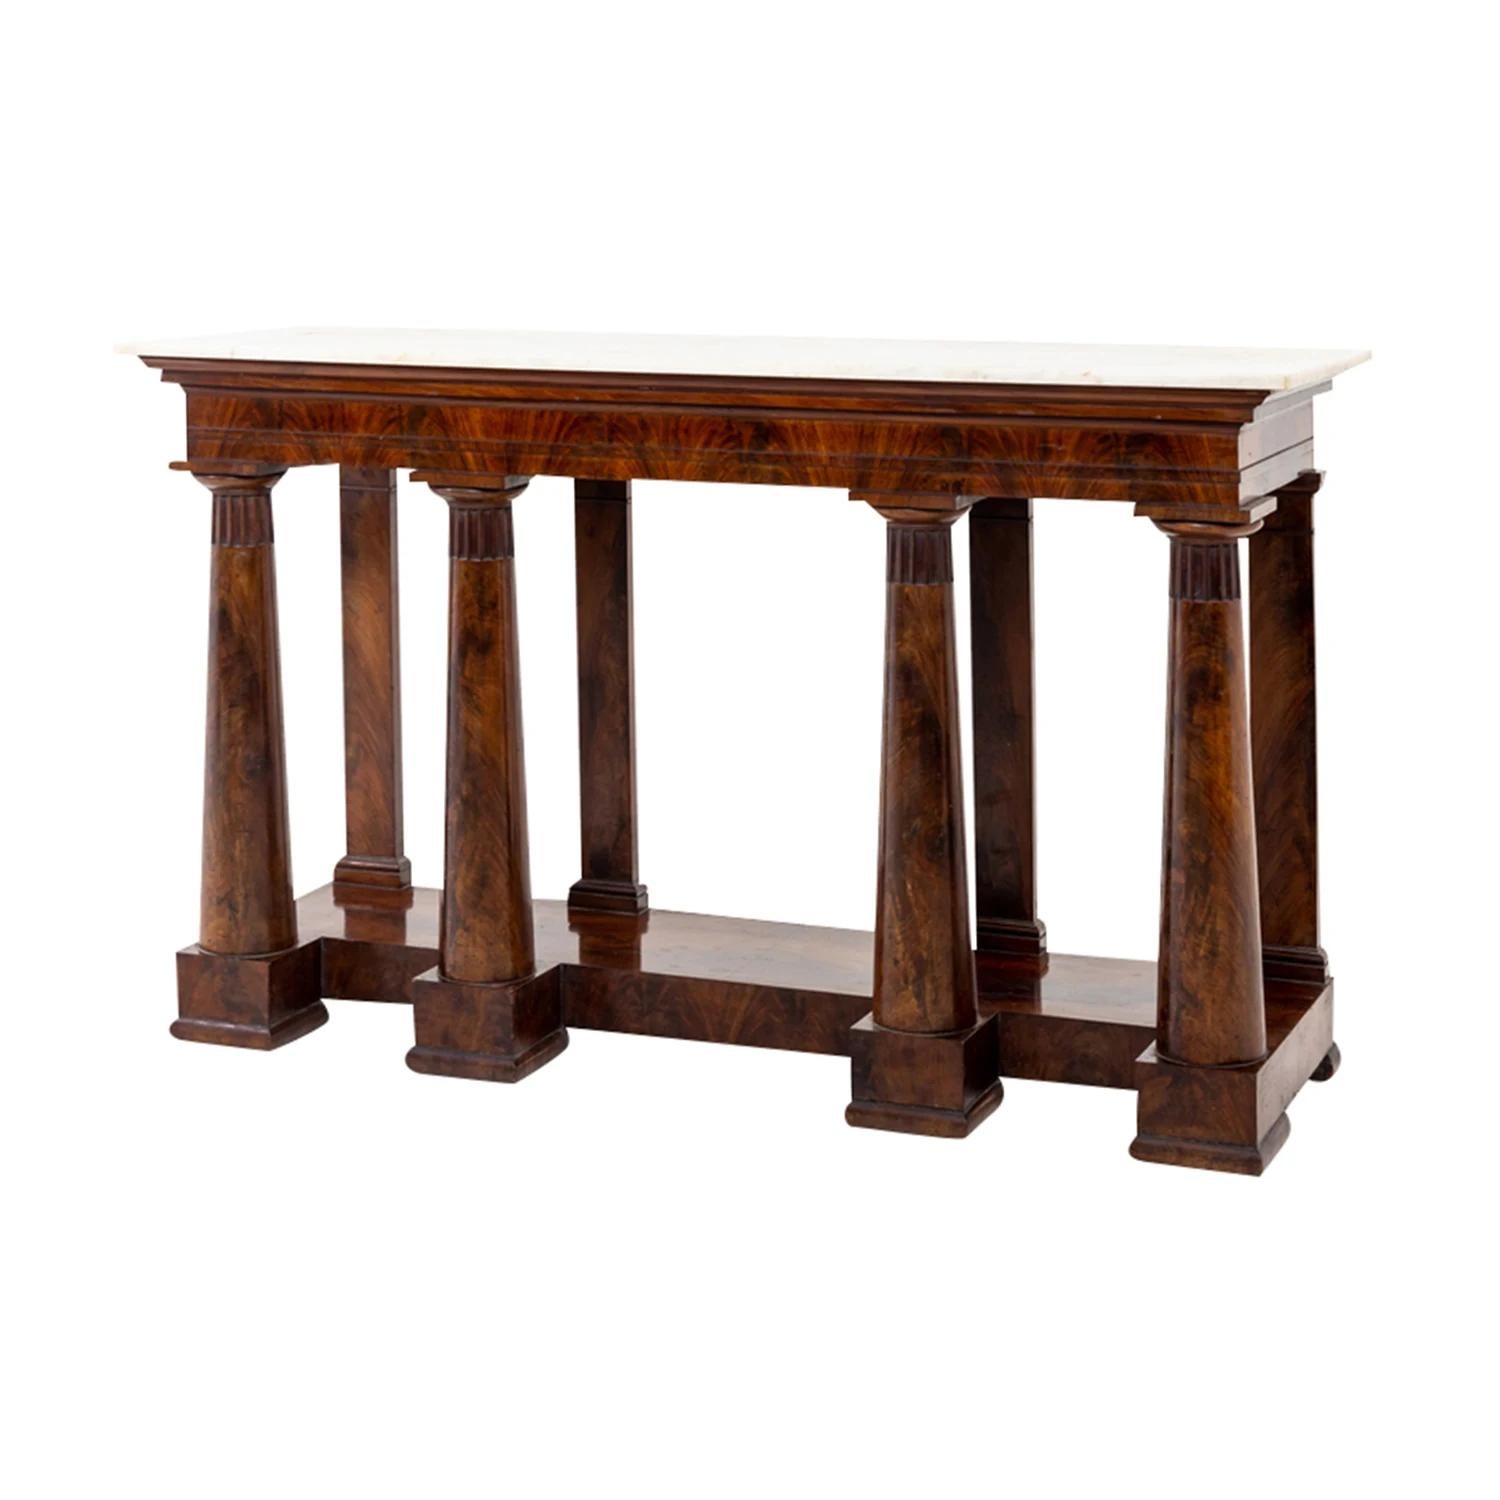 A dark-brown, antique neoclassical Italian center table made of handcrafted shellac polished Mahogany, in good condition. The freestanding polished console table is composed with a white-grey marble top, standing on four columns and pilasters each,